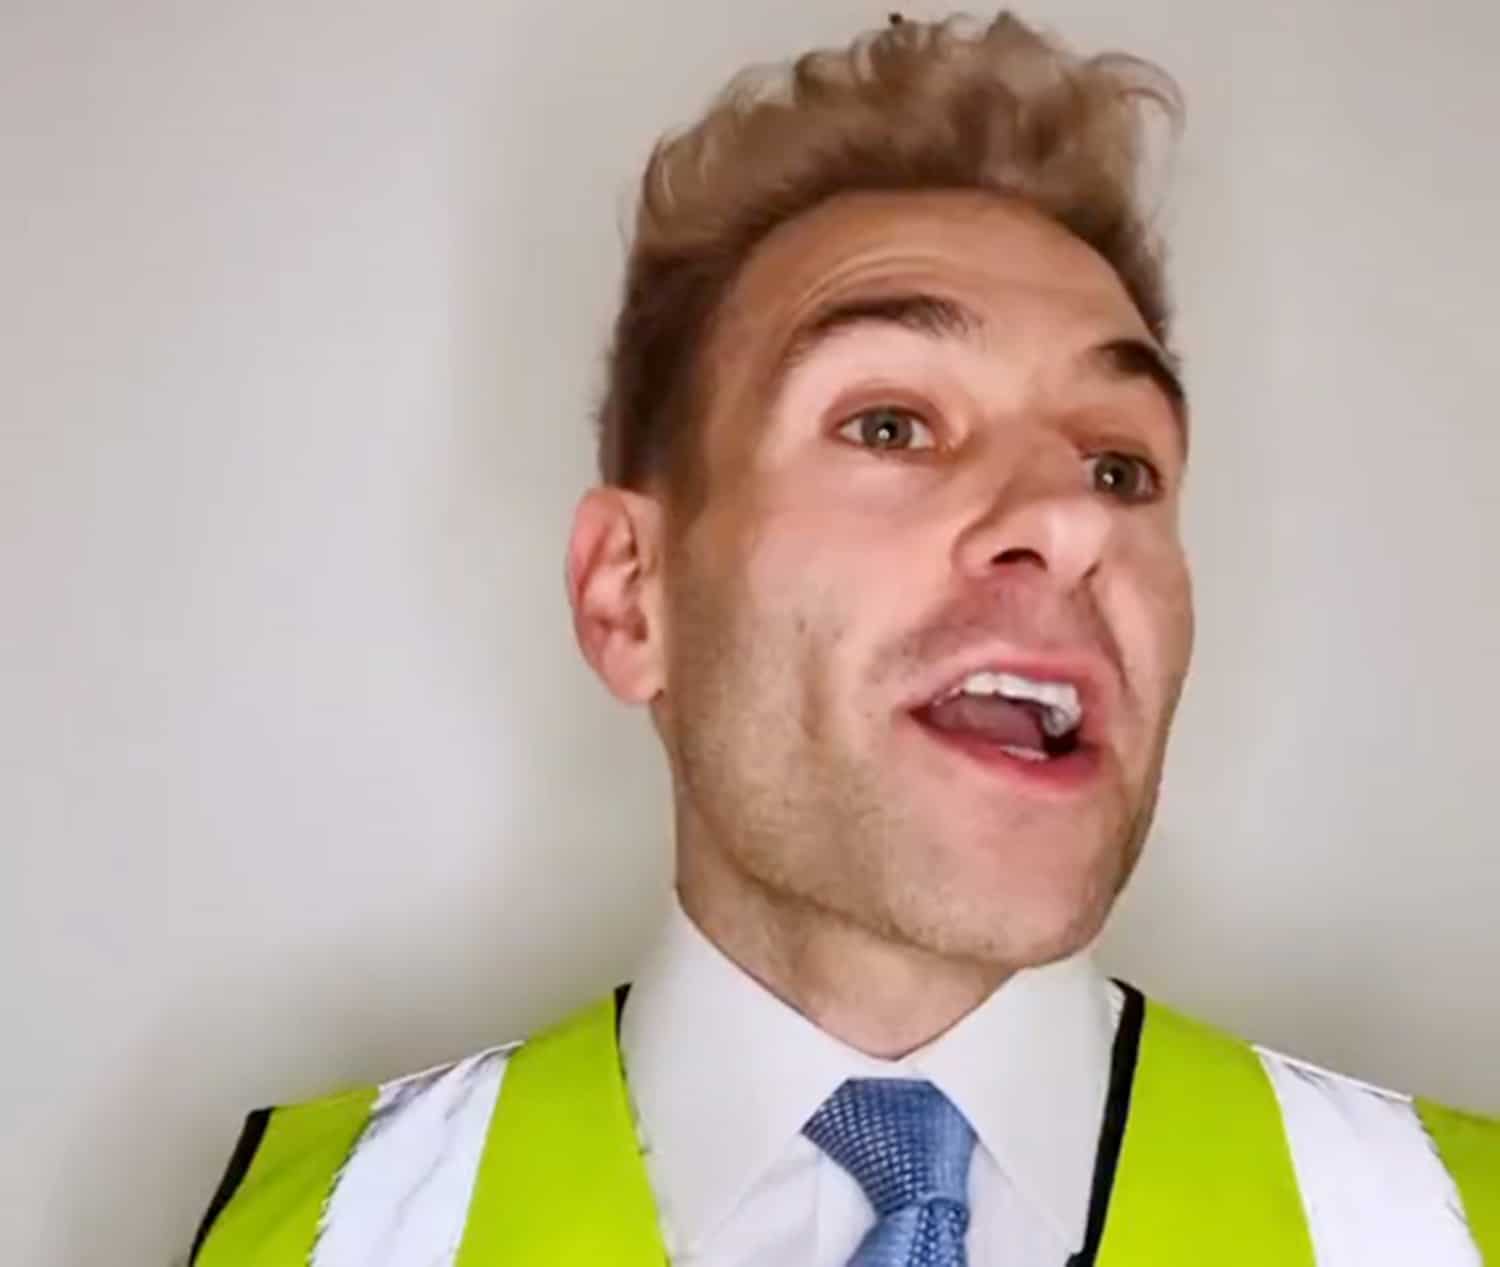 Comedian slams new immigration proposals in hilarious viral vid